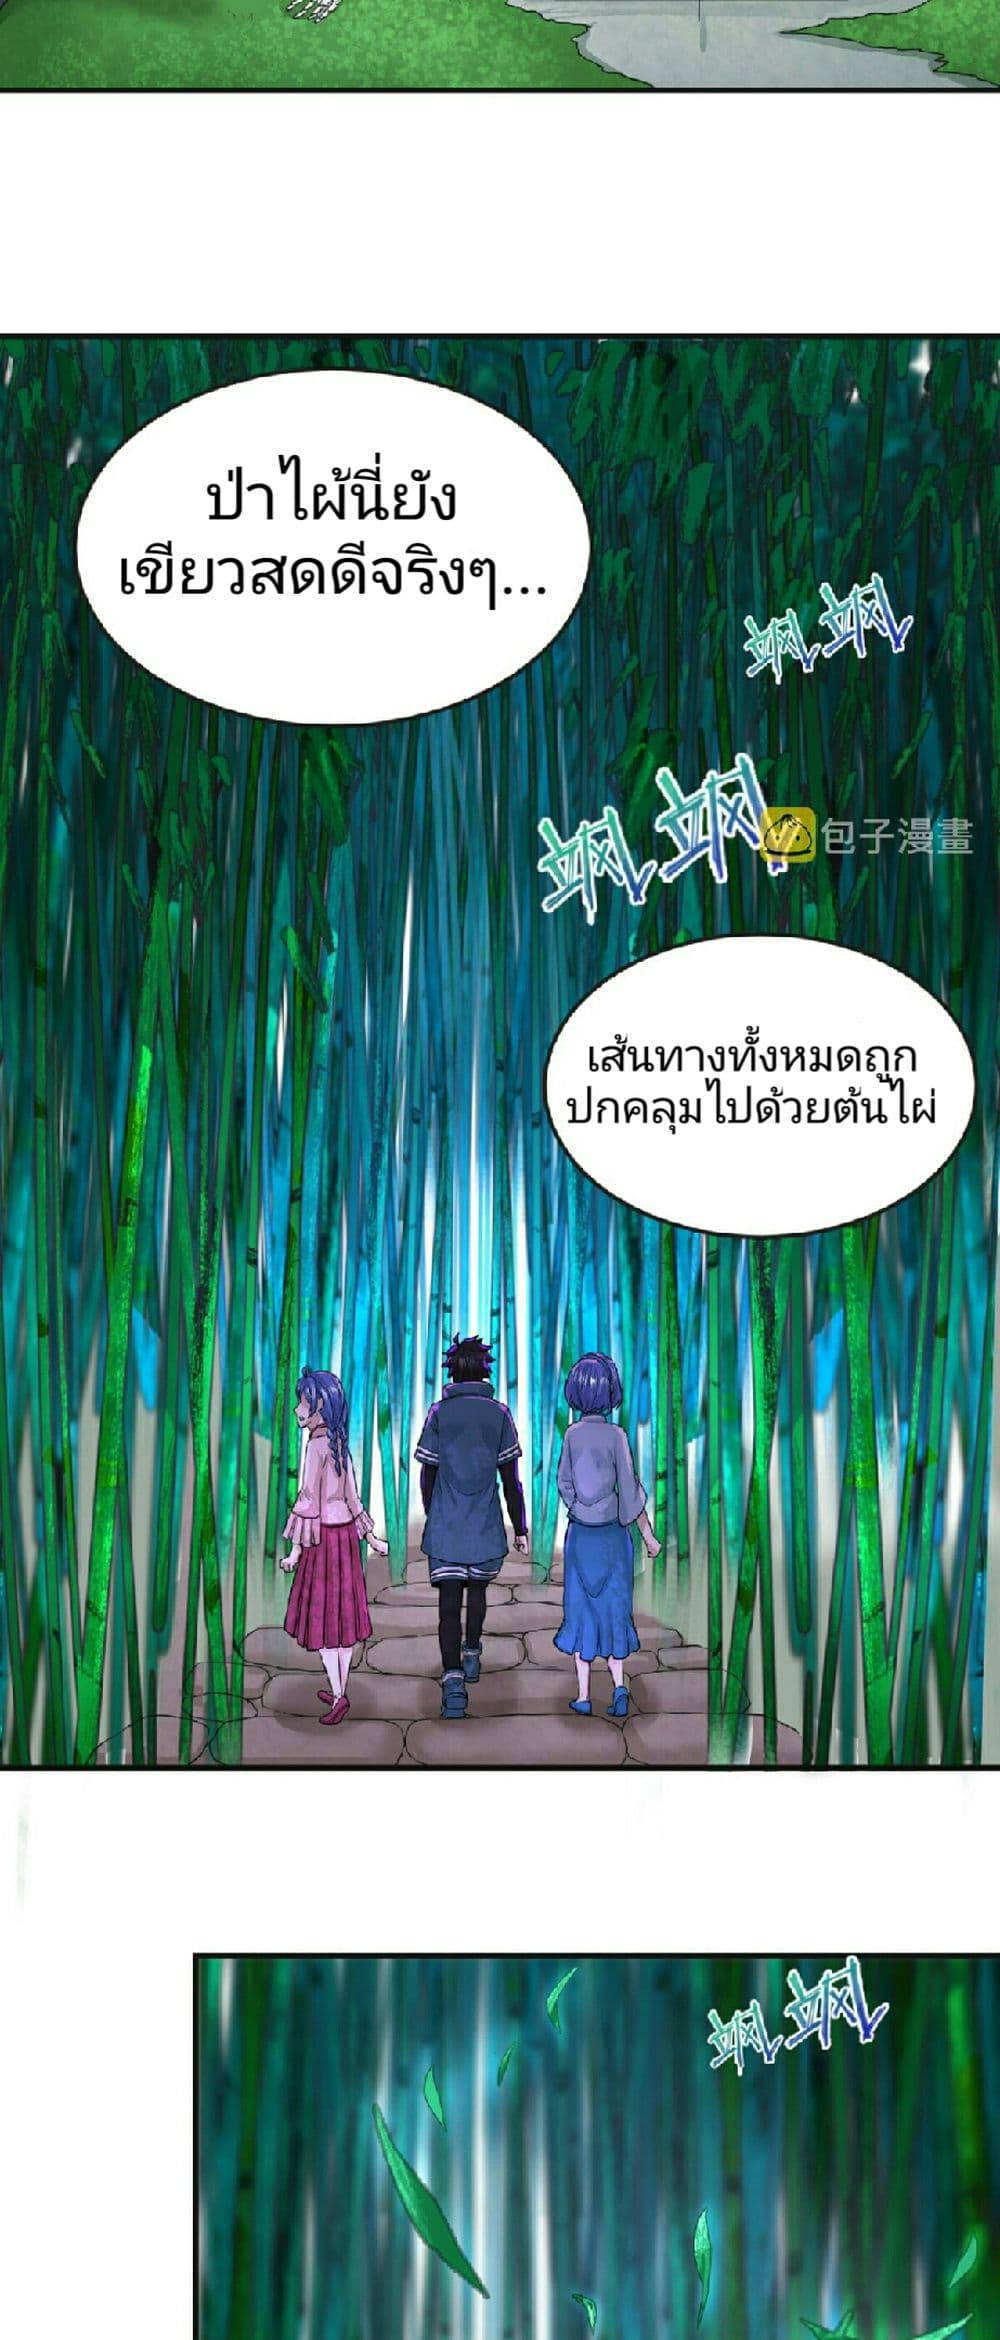 The Age of Ghost Spirits à¸à¸­à¸à¸à¸µà¹ 50 (8)